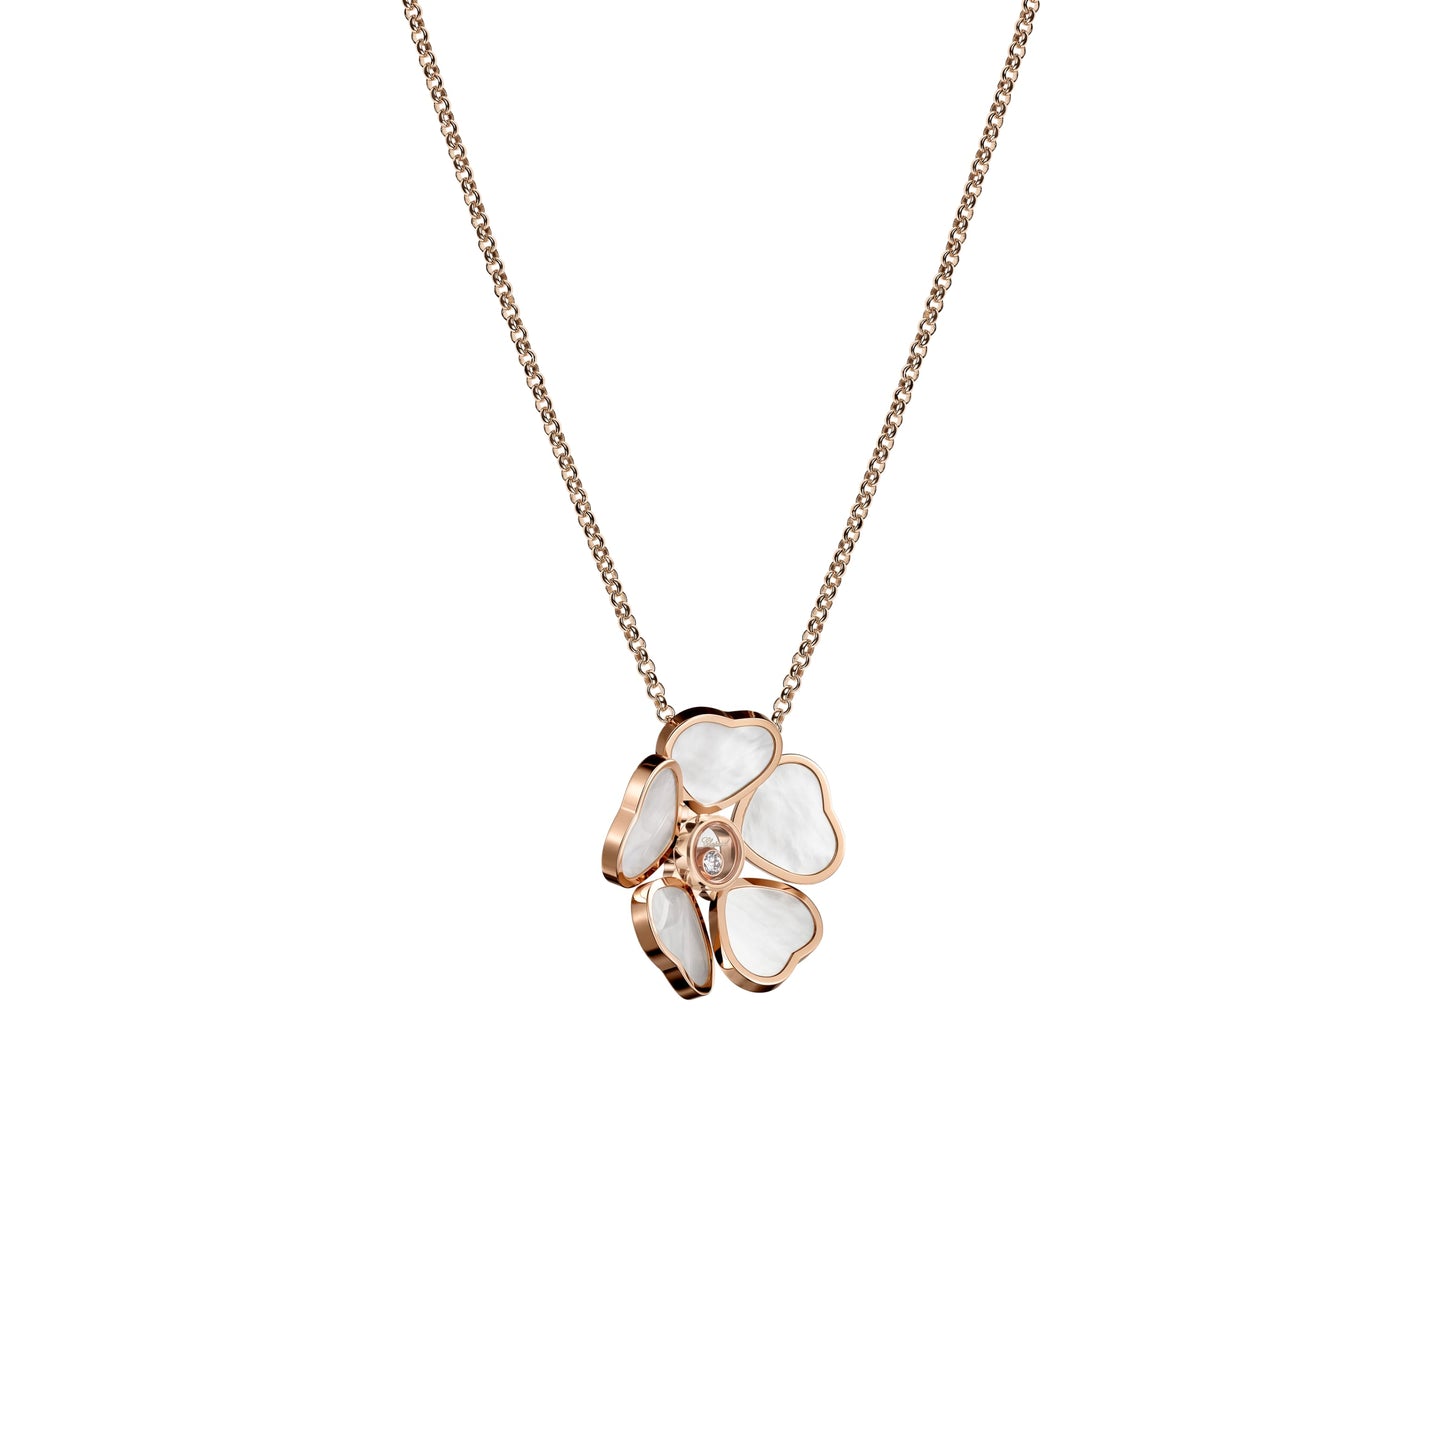 HAPPY HEARTS FLOWERS PENDANT, ETHICAL ROSE GOLD, DIAMOND 79A085-5301